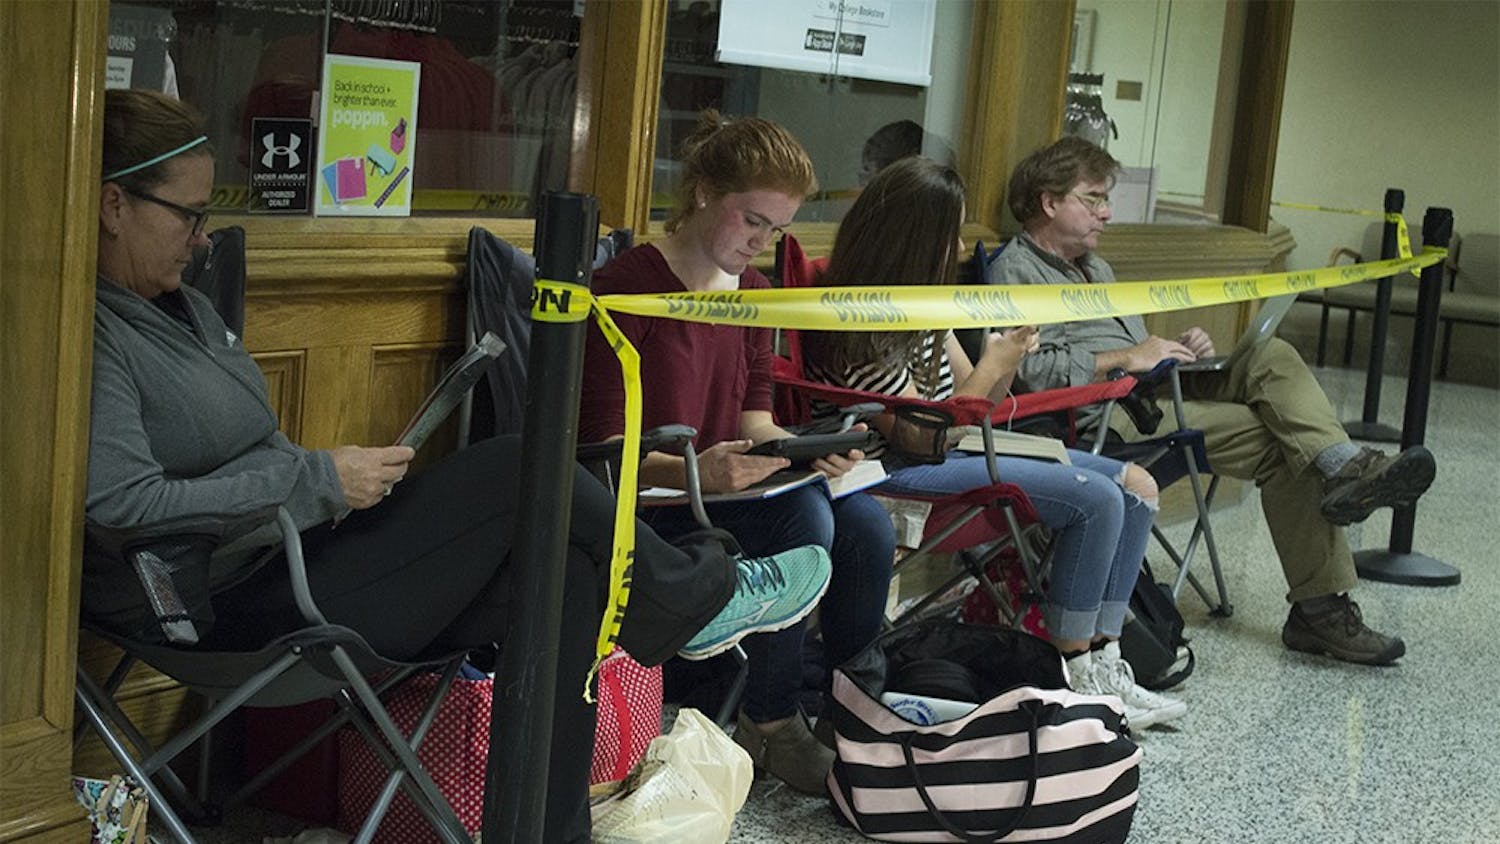 Rebecca and daughter Abigail Miller sit at the front of the line for Tyler Oakley on Thursday night outside of the closed IU Bookstore in the IMU. The Millers got in line around 4 p.m. on Thursday and will be there until at least 8 a.m. Friday until they get a wristband to come back and meet and have a book signed by Oakley at 5 p.m.